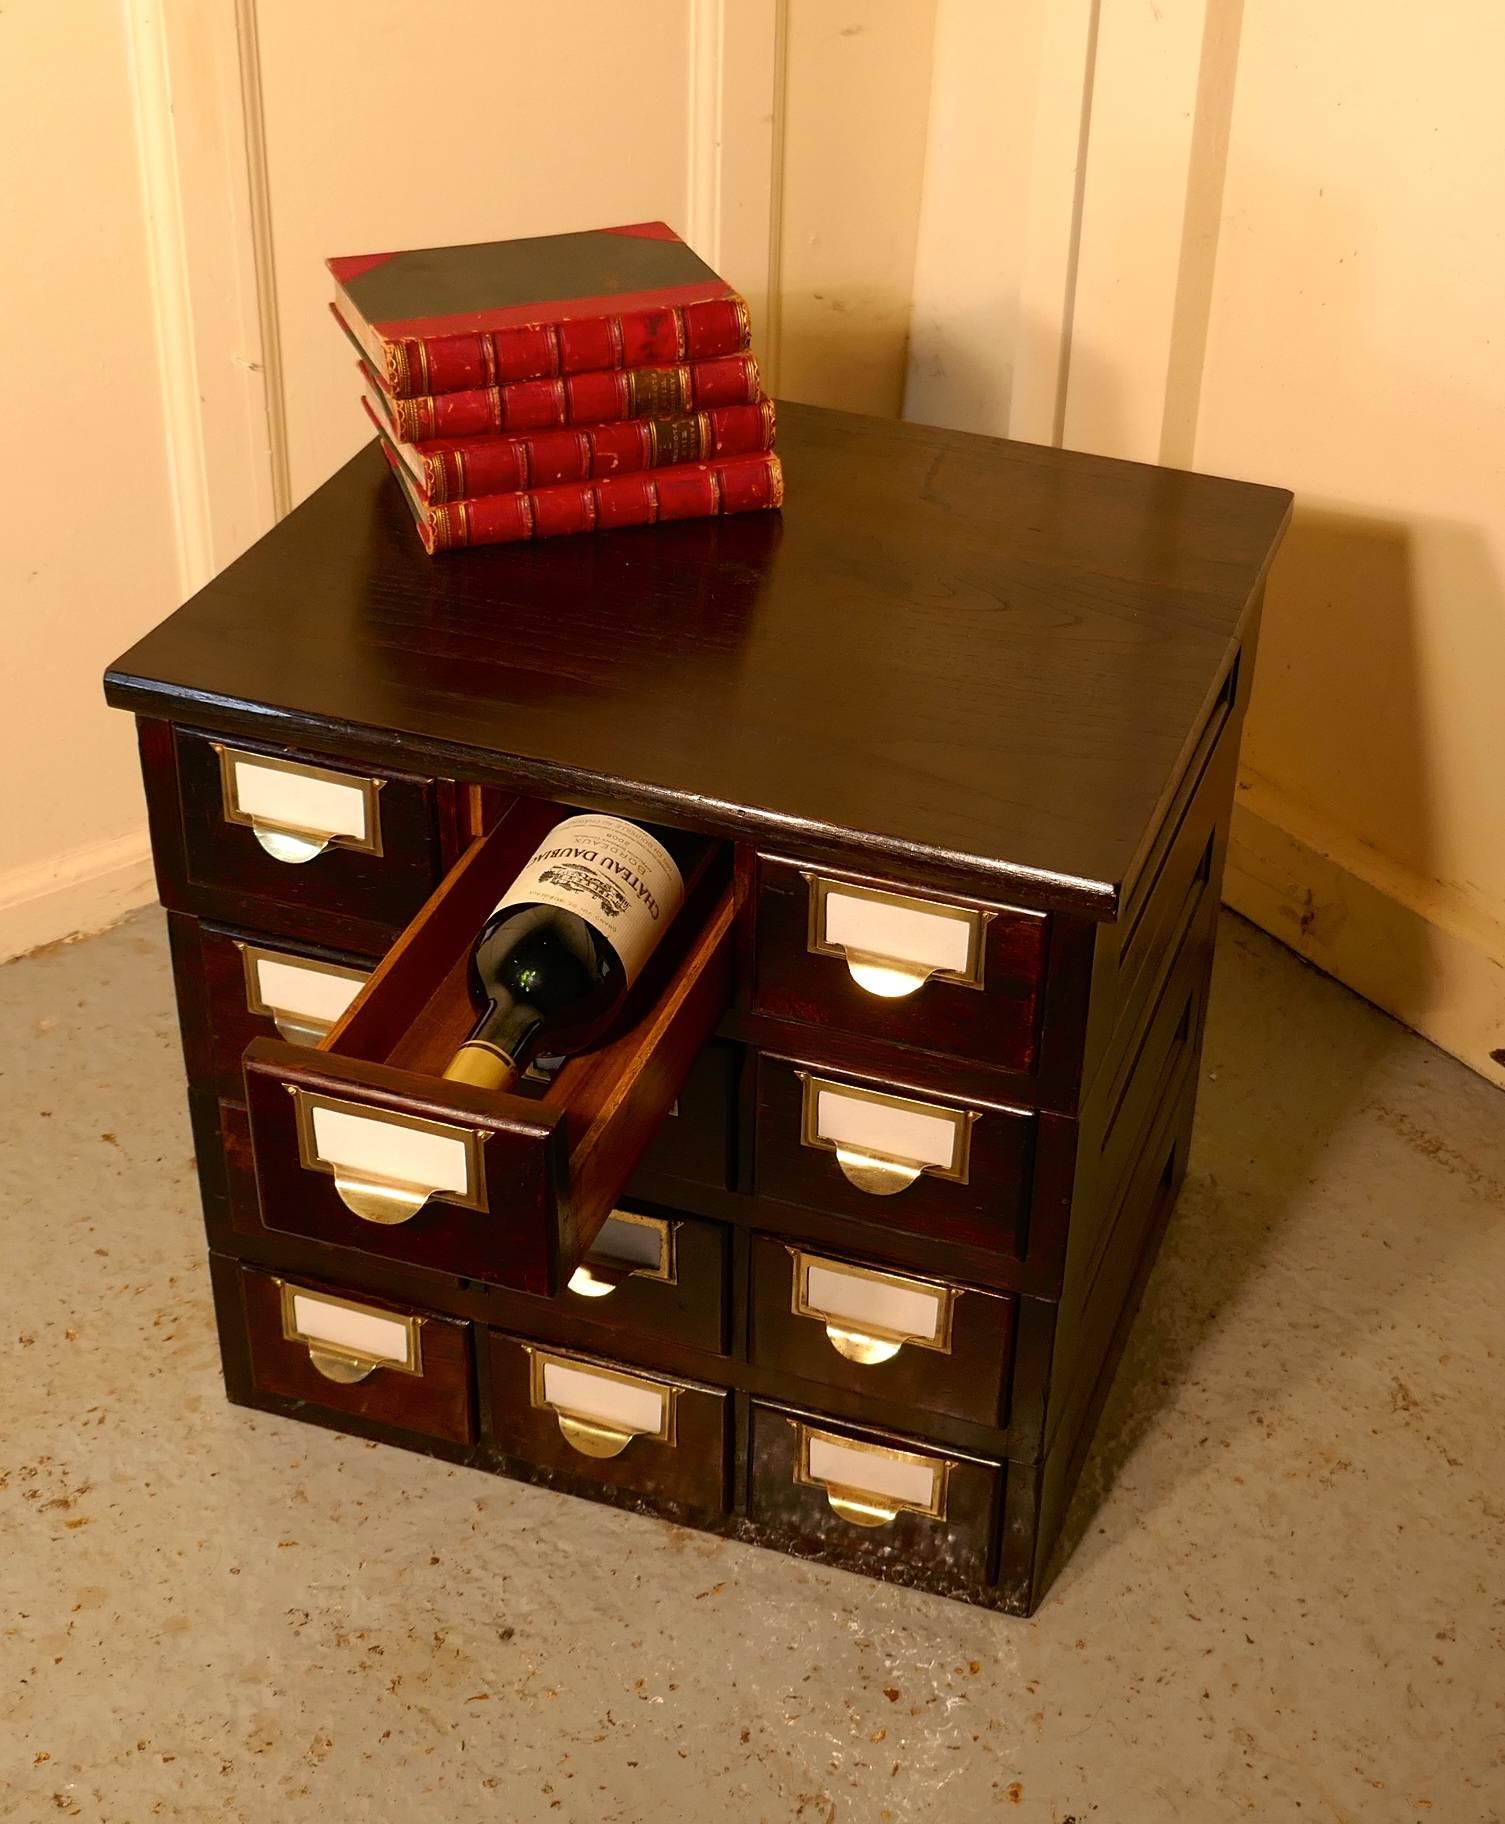 12 Drawer Oak Card Index Filing Cabinet, Wine Rack In Good Condition In Chillerton, Isle of Wight